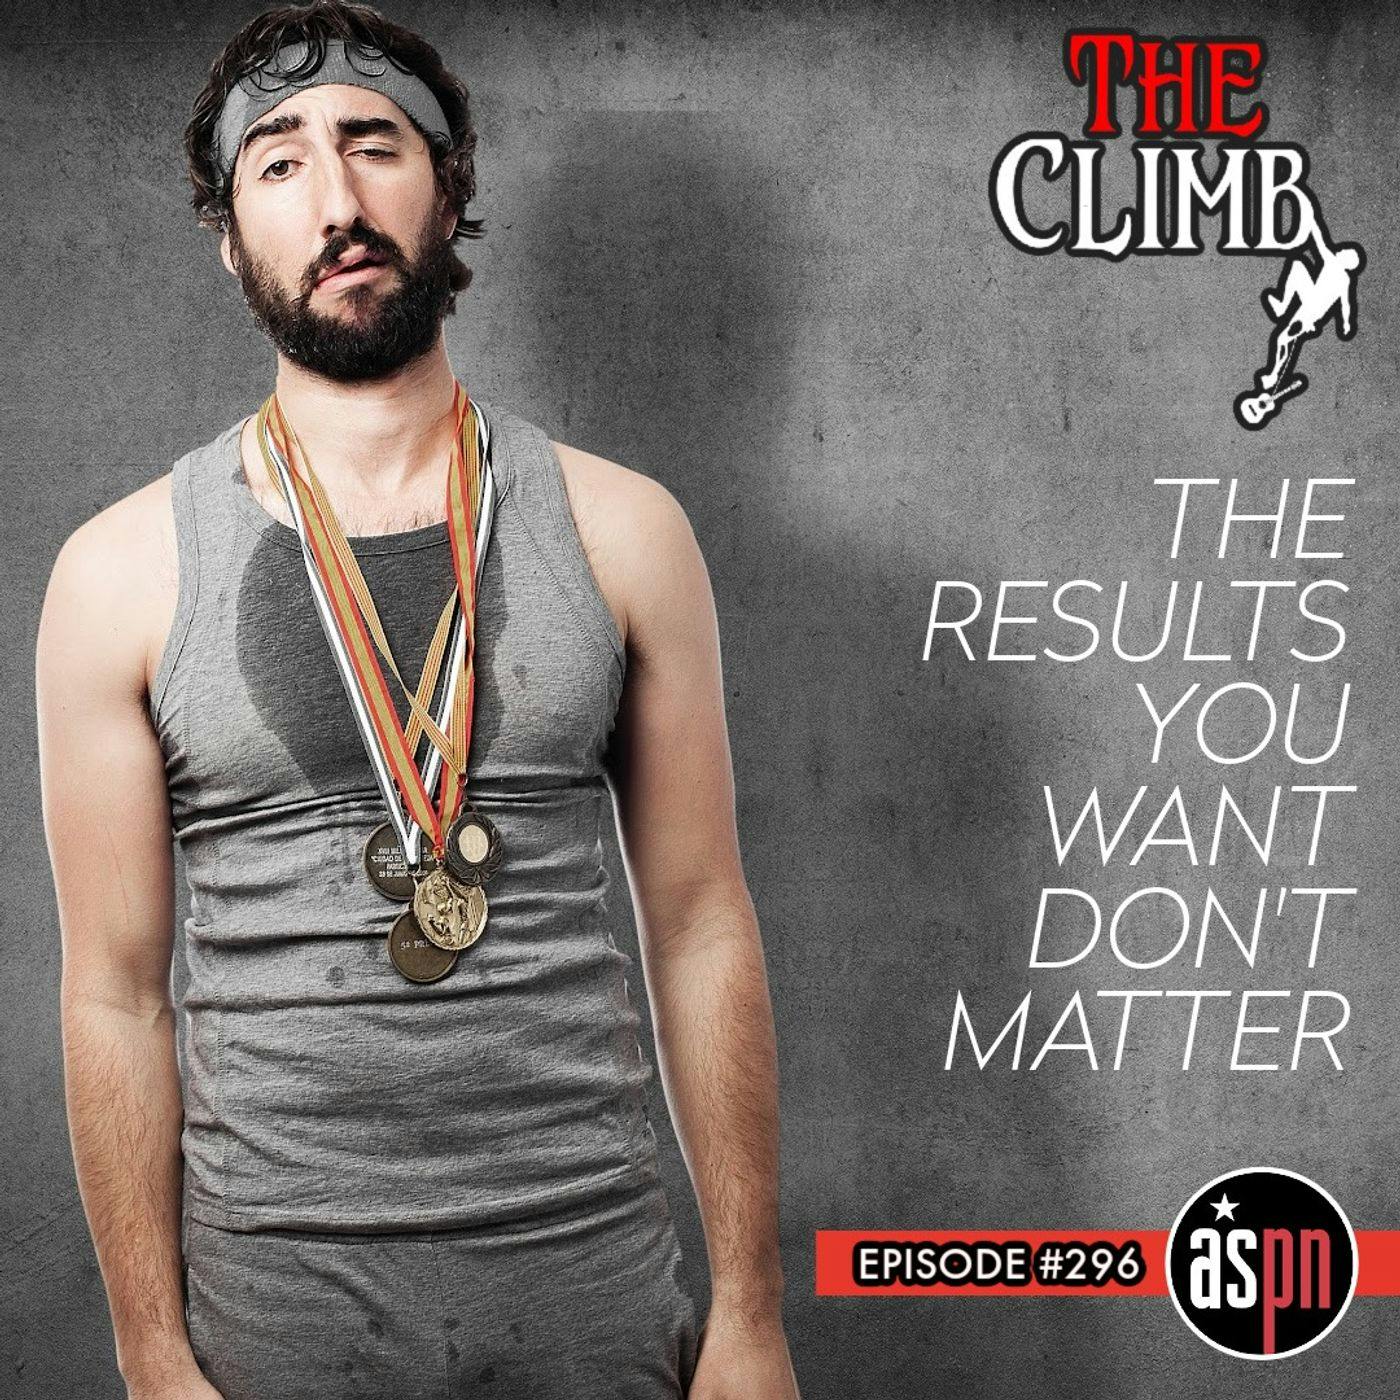 Episode #296: The Results You Want Don't Matter